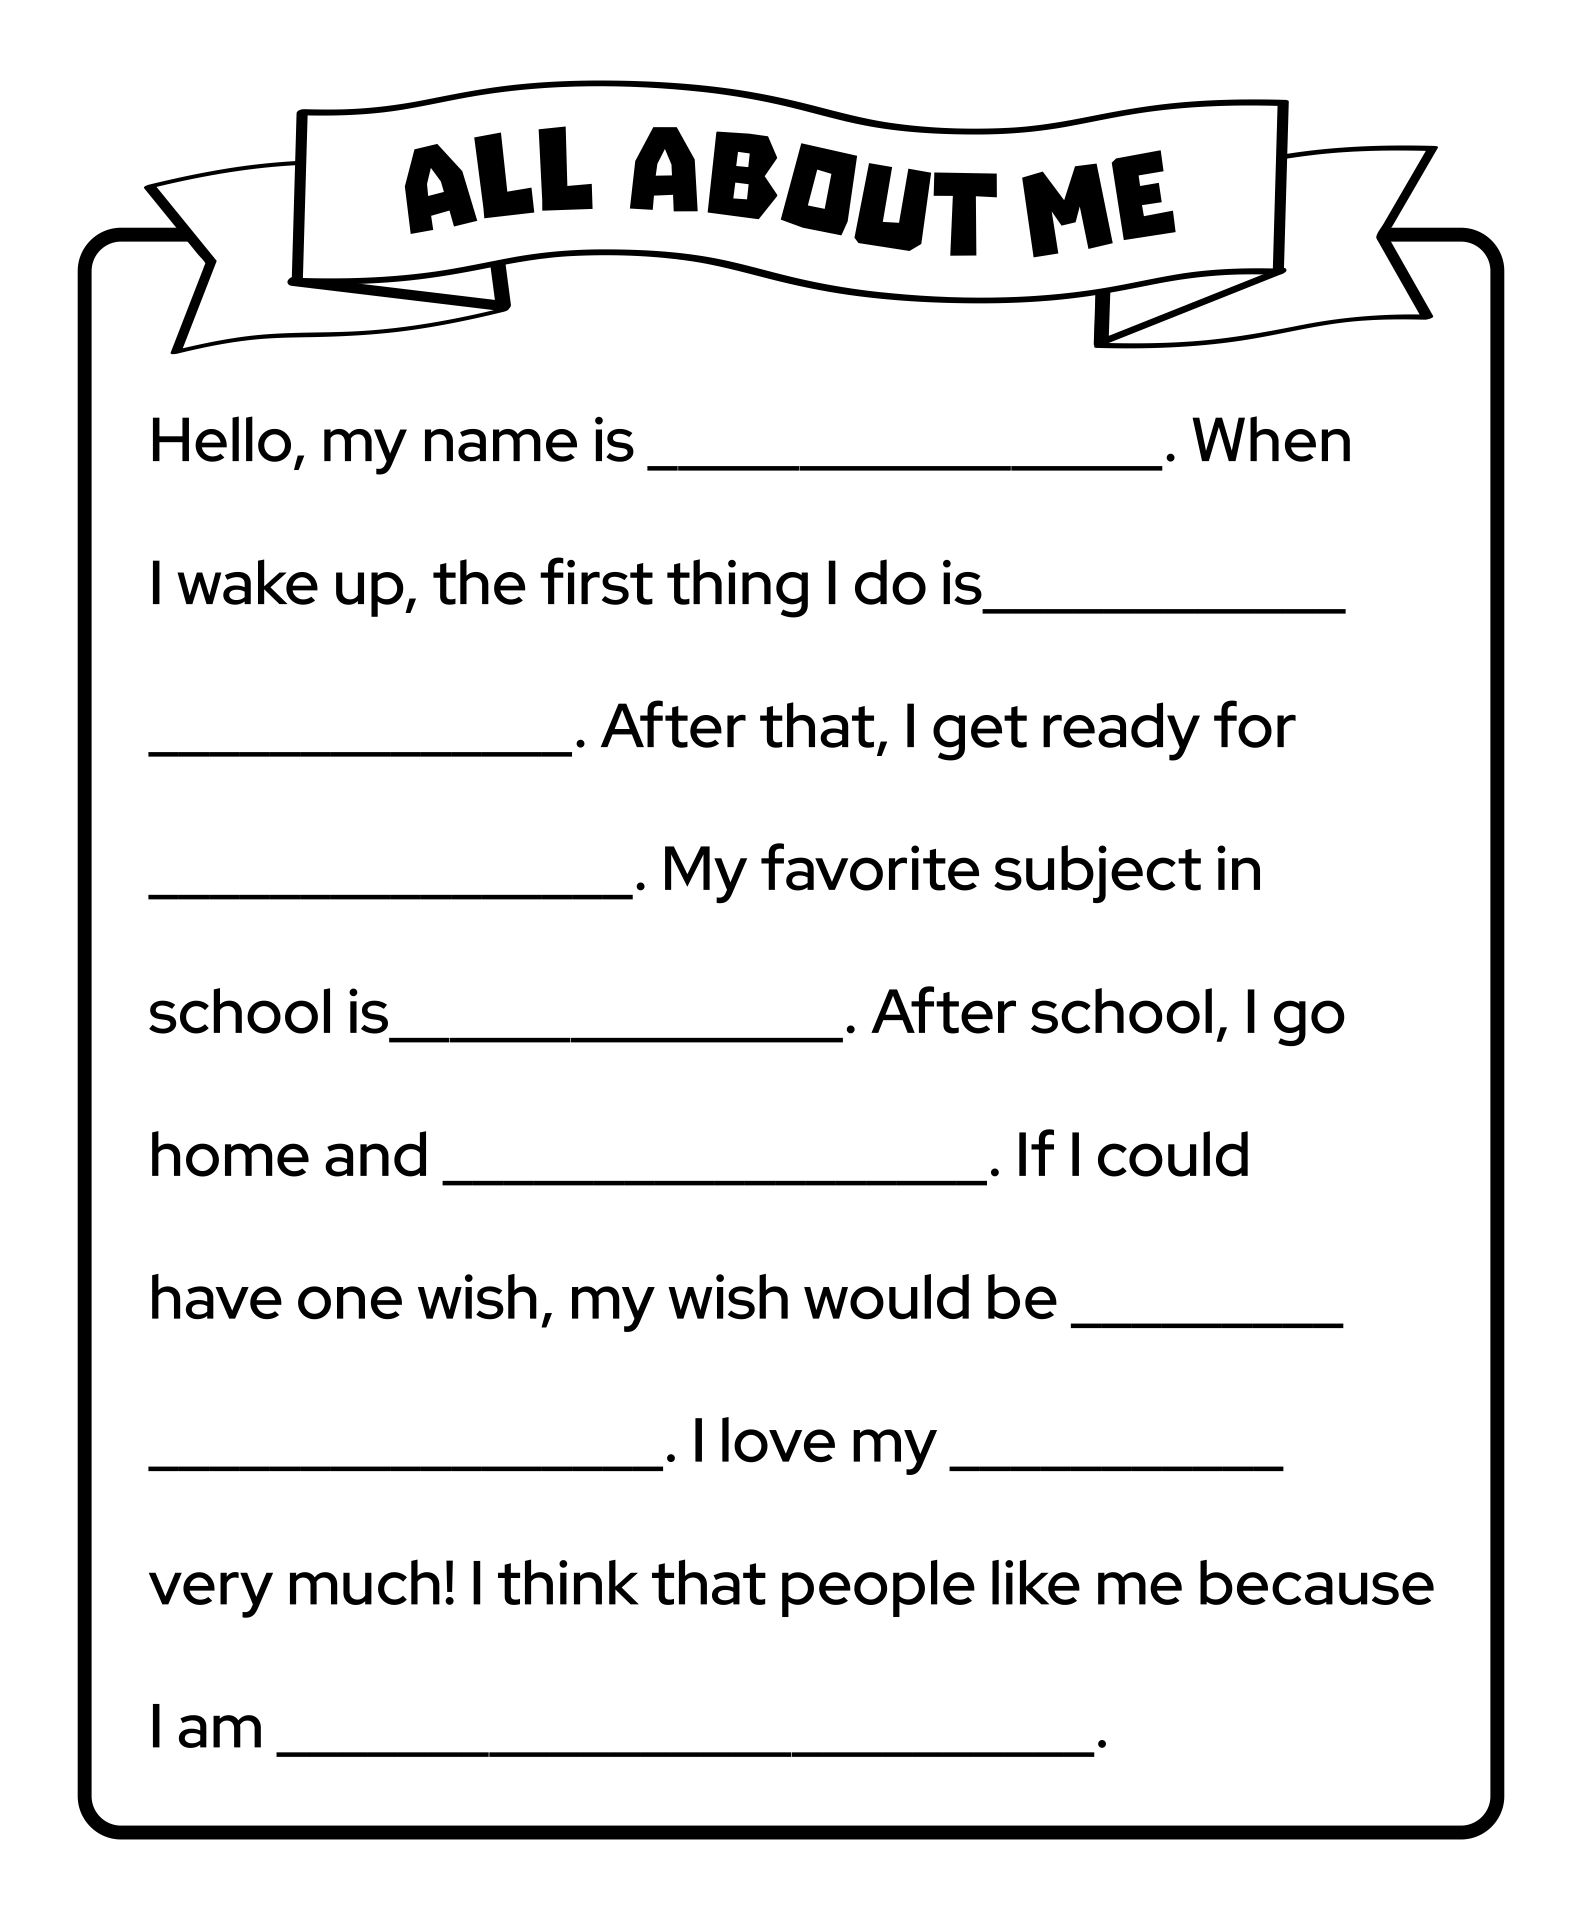 5-best-images-of-printable-worksheets-about-me-adult-back-to-school